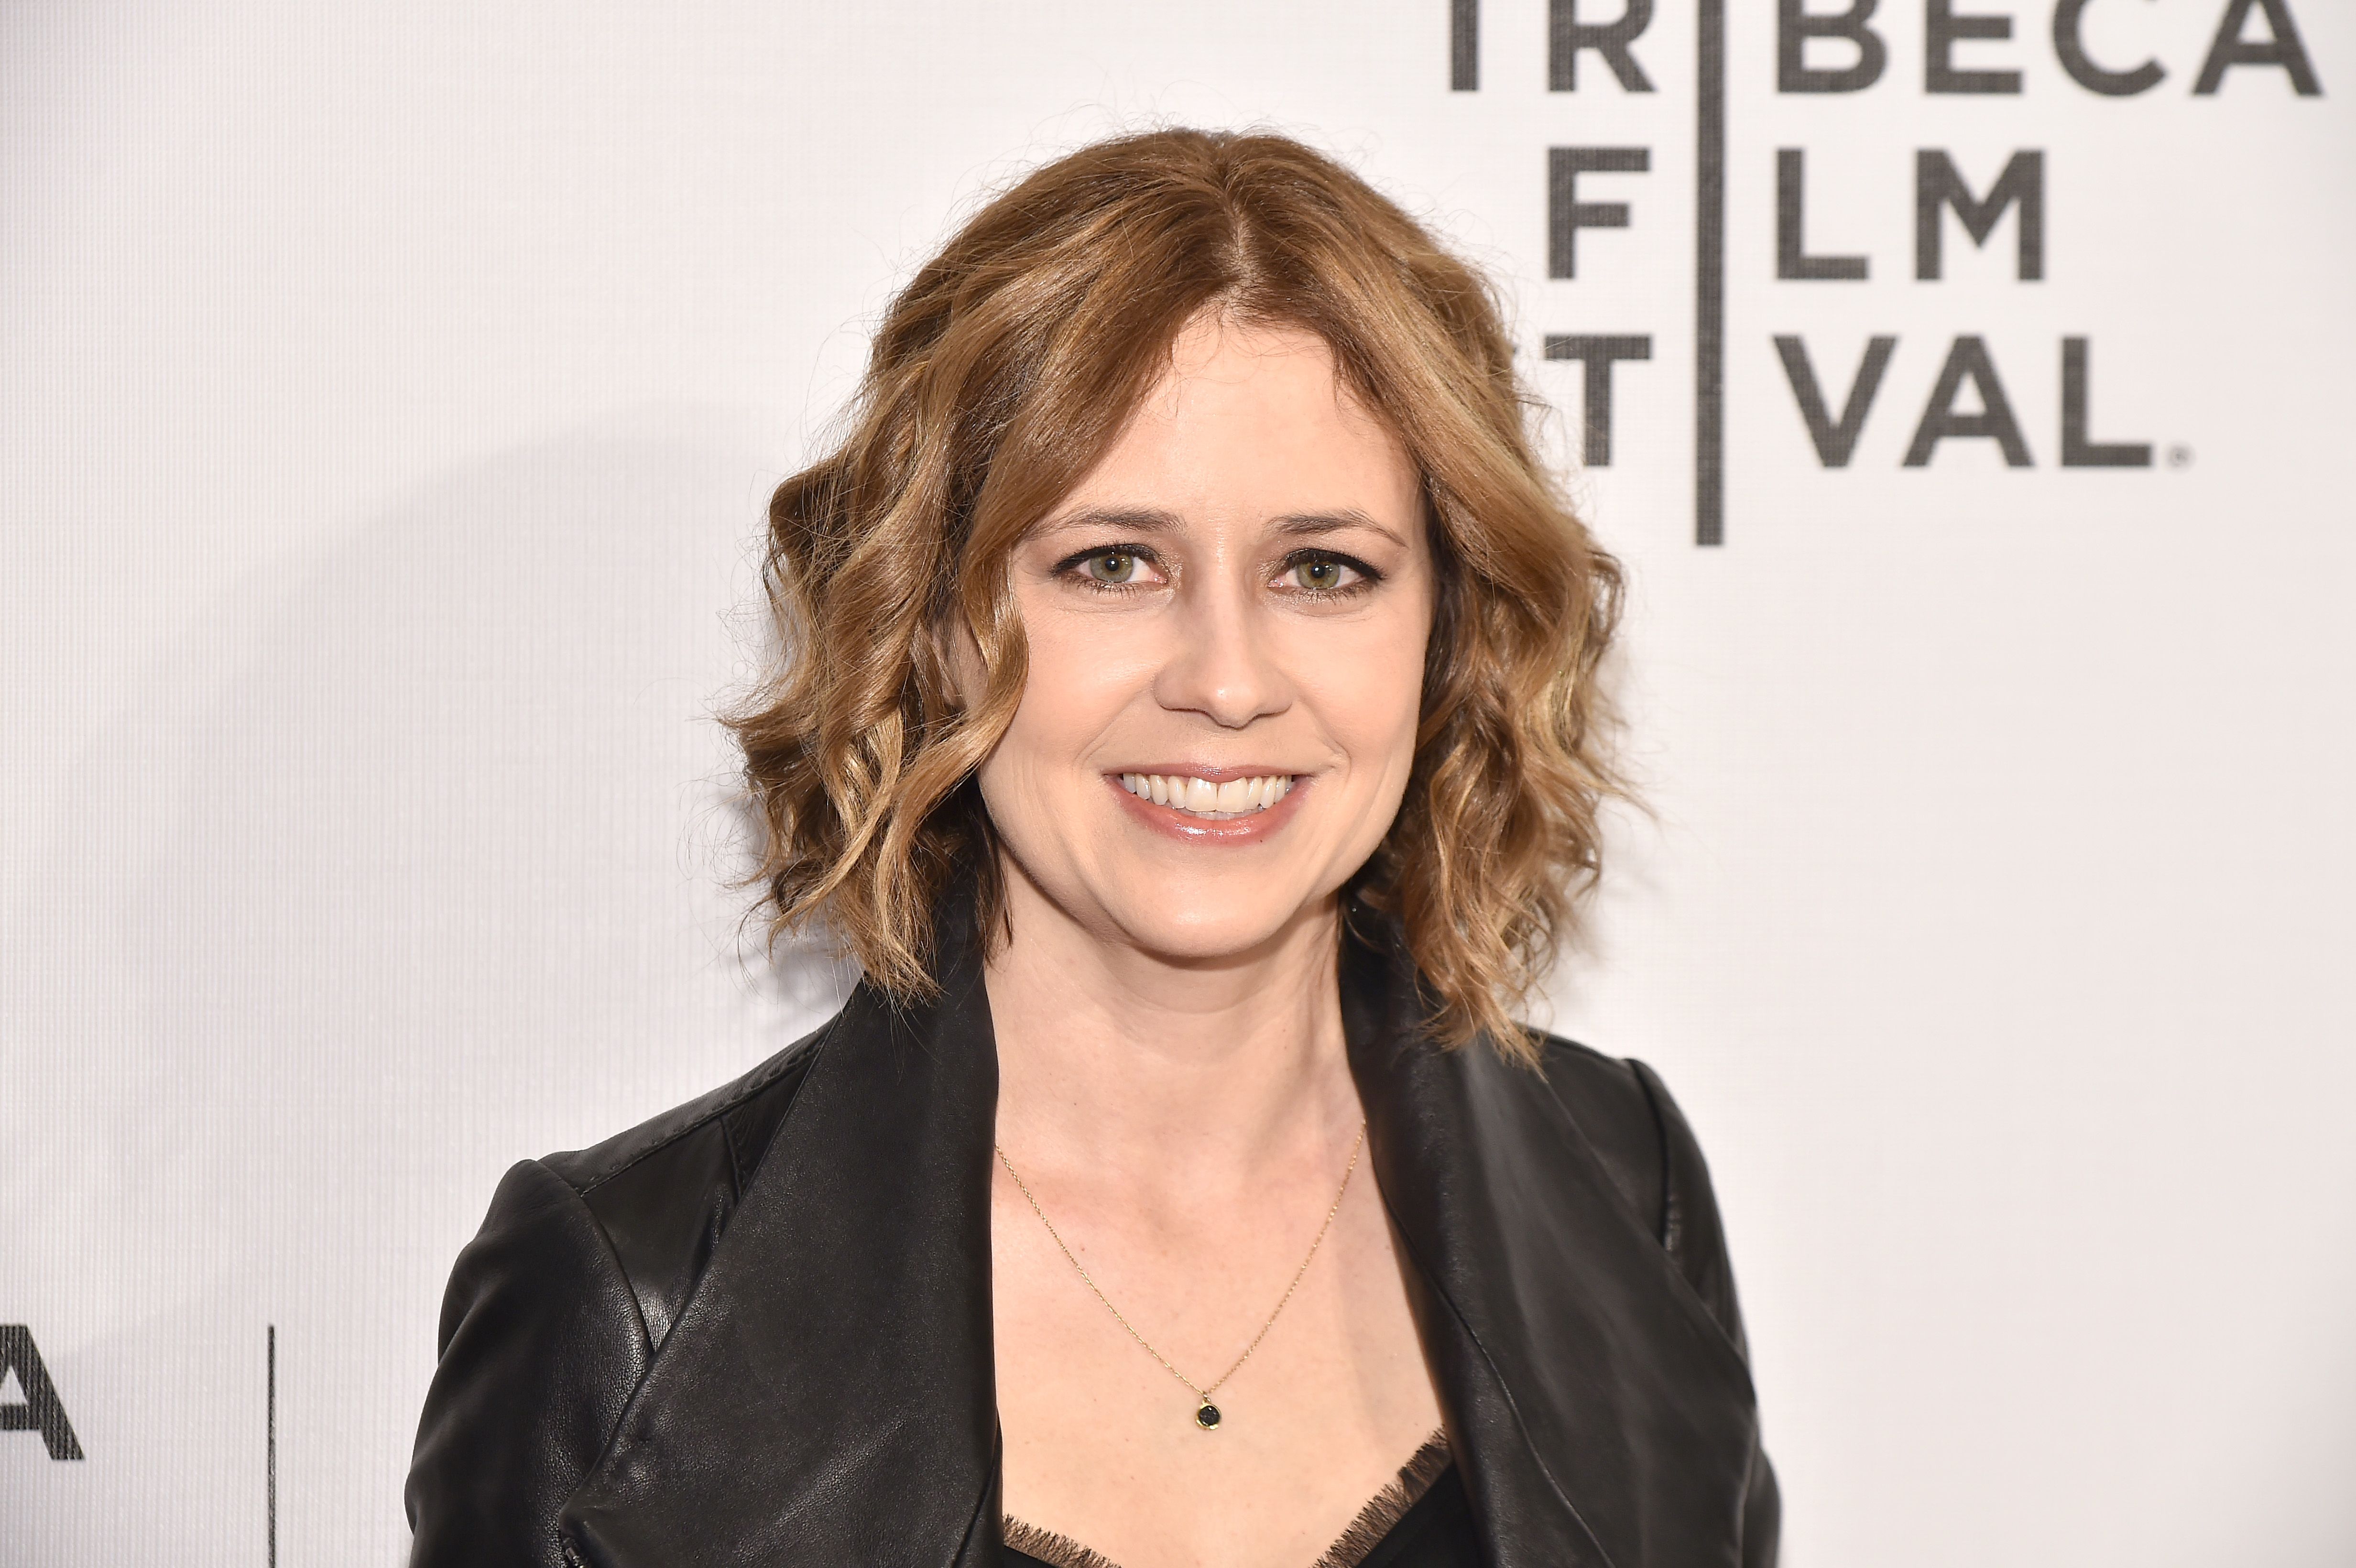 Jenna Fischer on April 23, 2016, in New York City. | Source: Getty Images